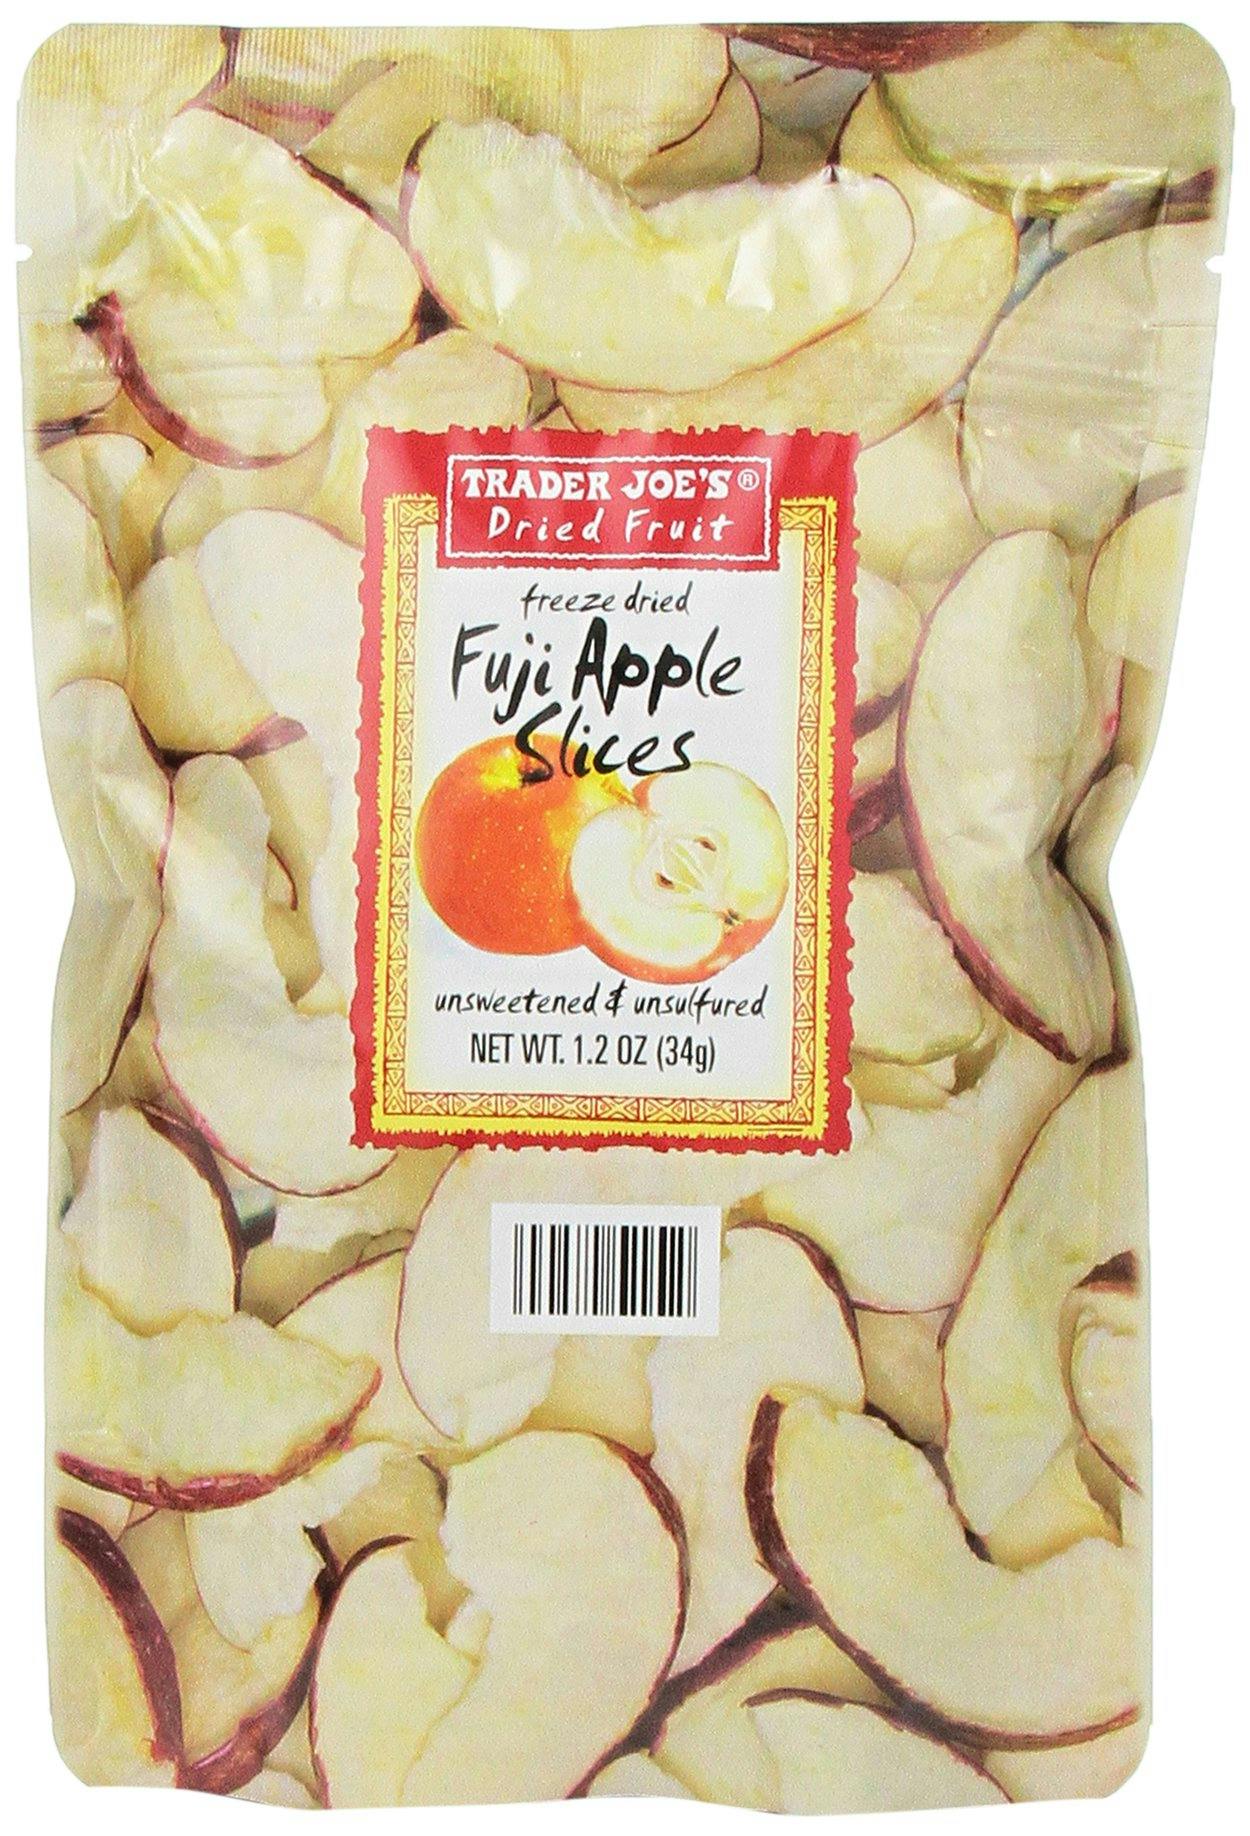 dehydrated apples (one bag) 